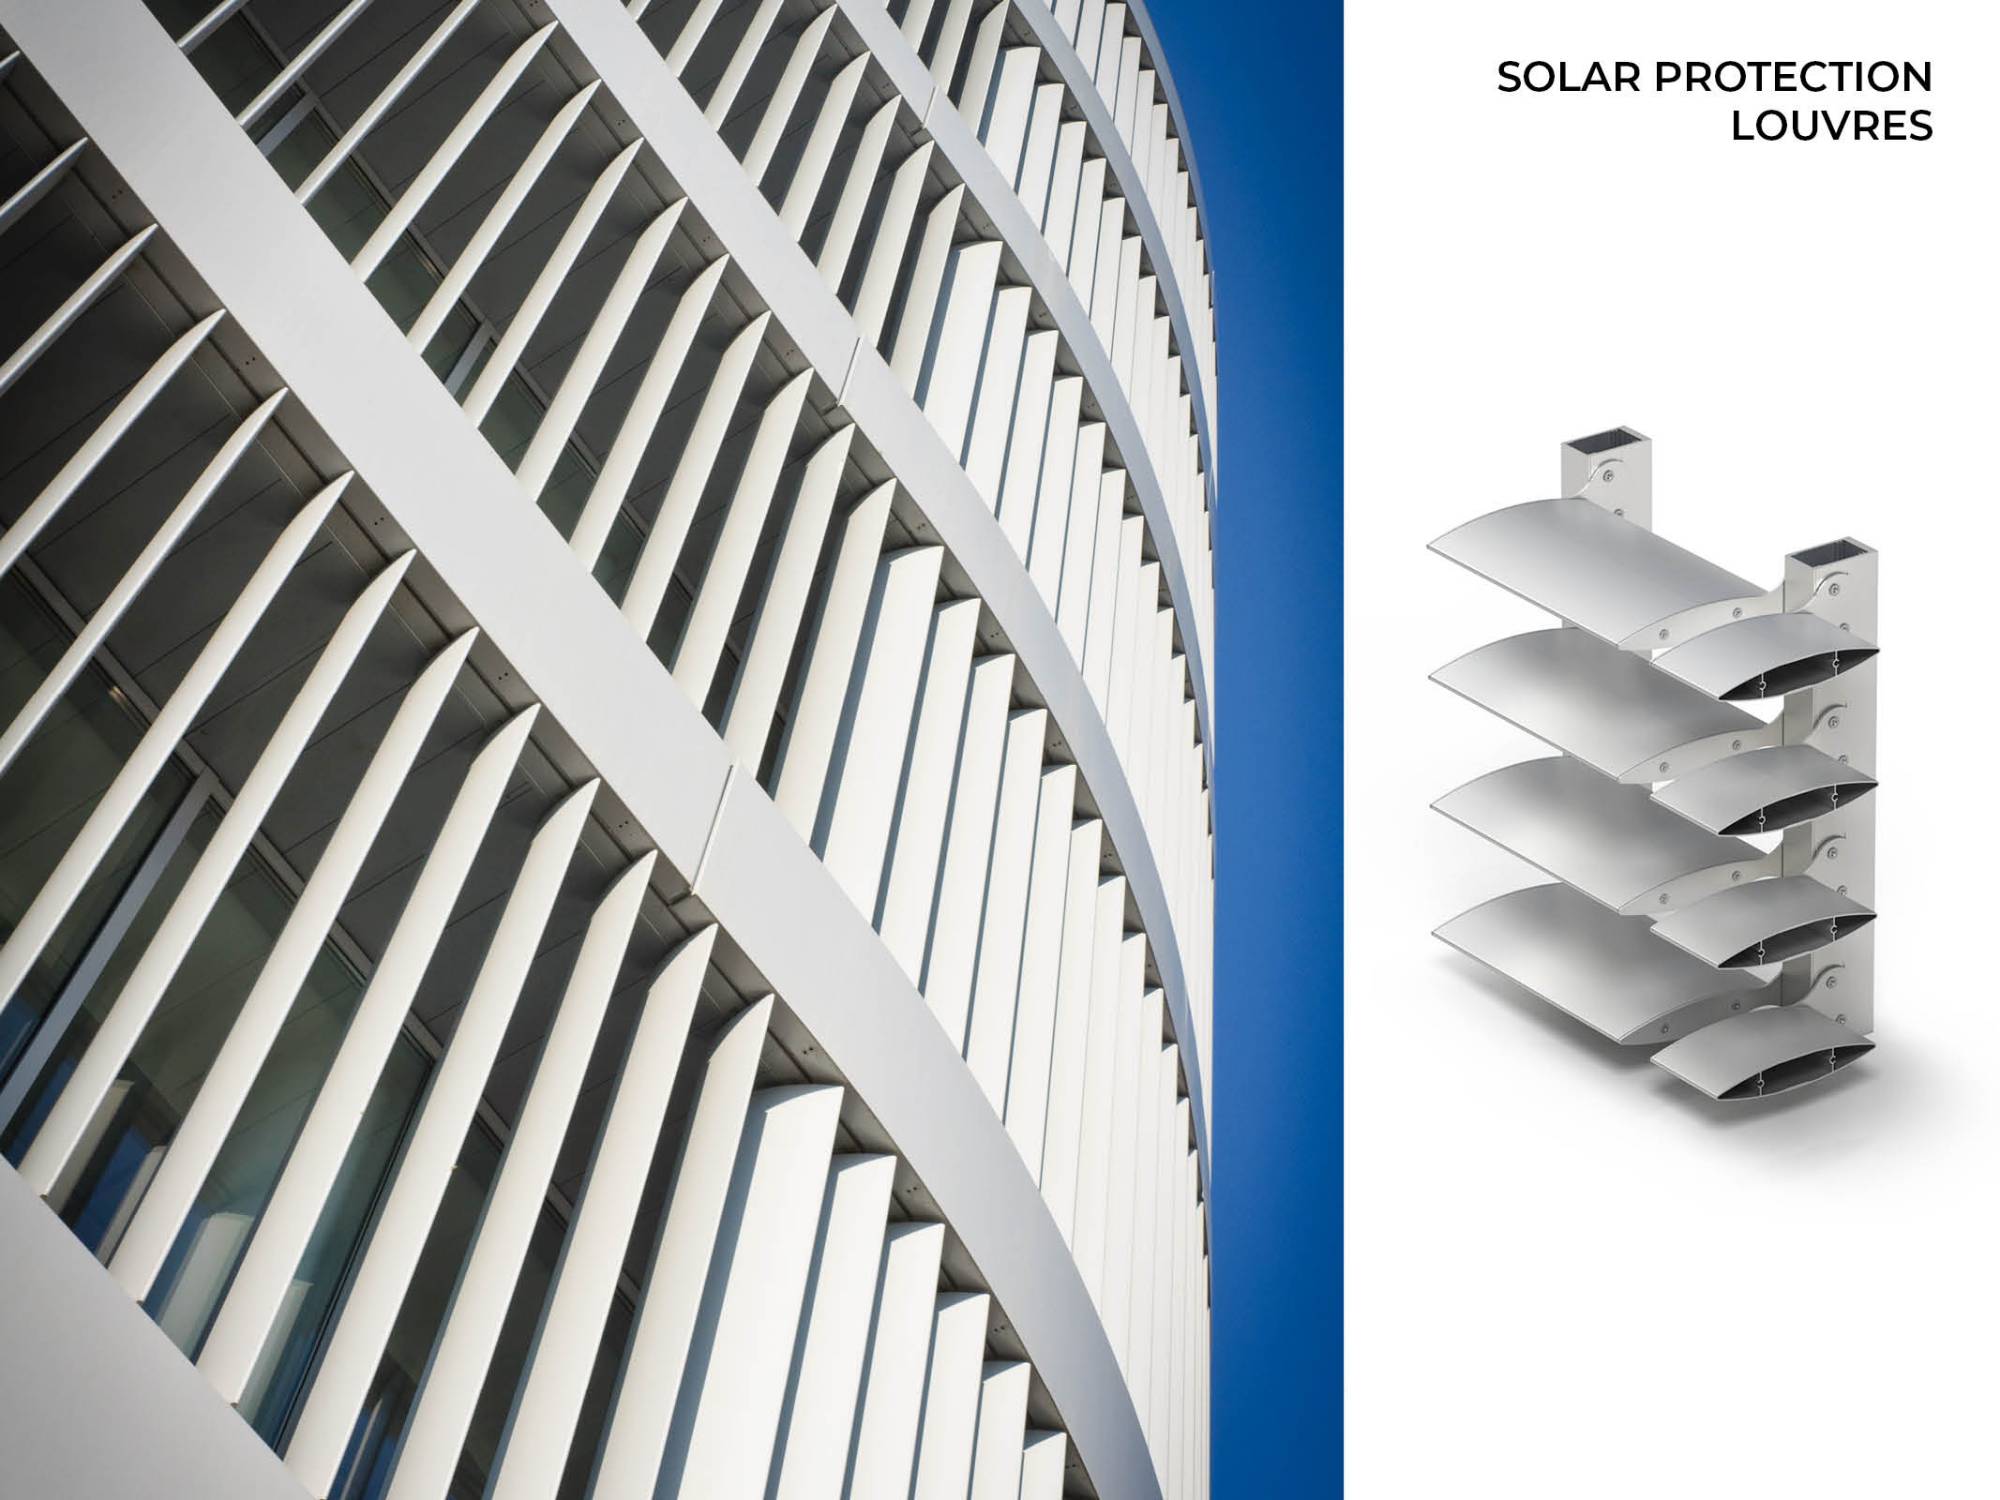 Solar Protection Louvres